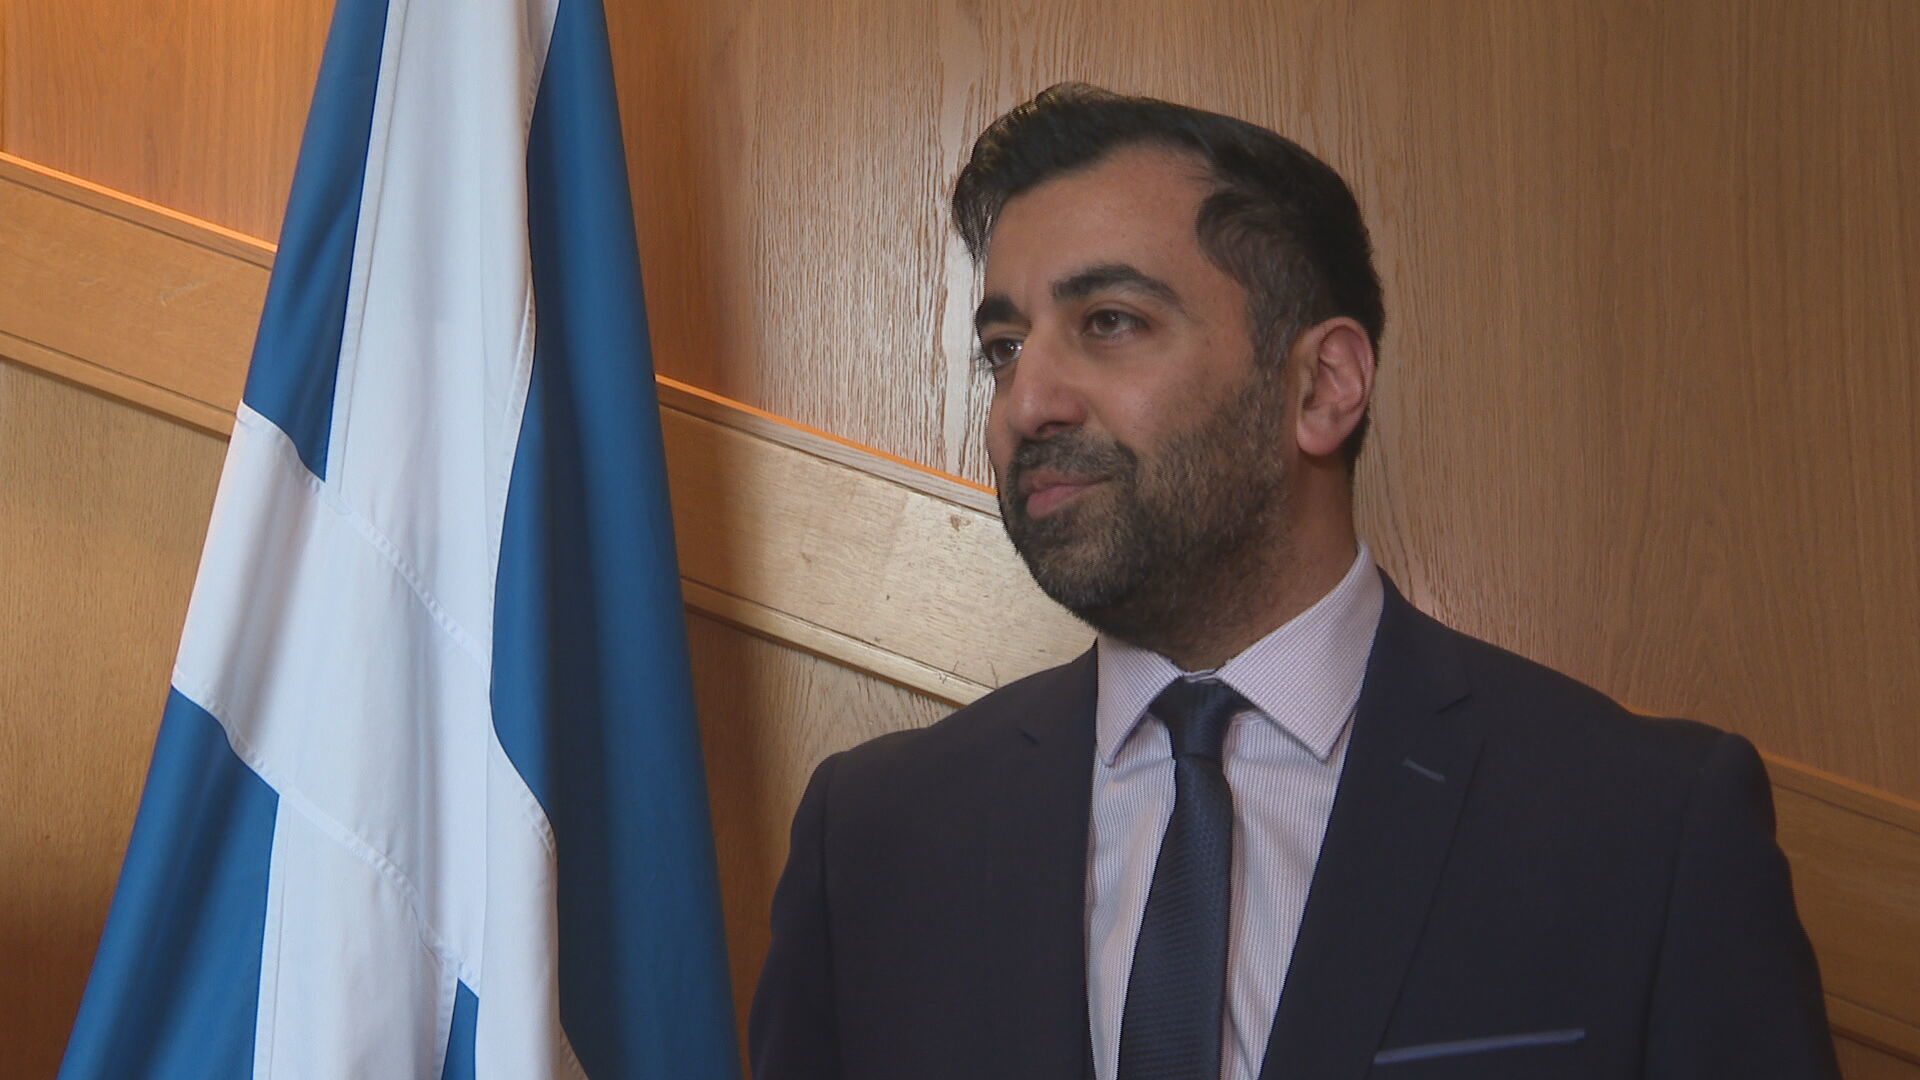 Salmond claims he has yet to receive a response from Humza Yousaf about electoral proposals